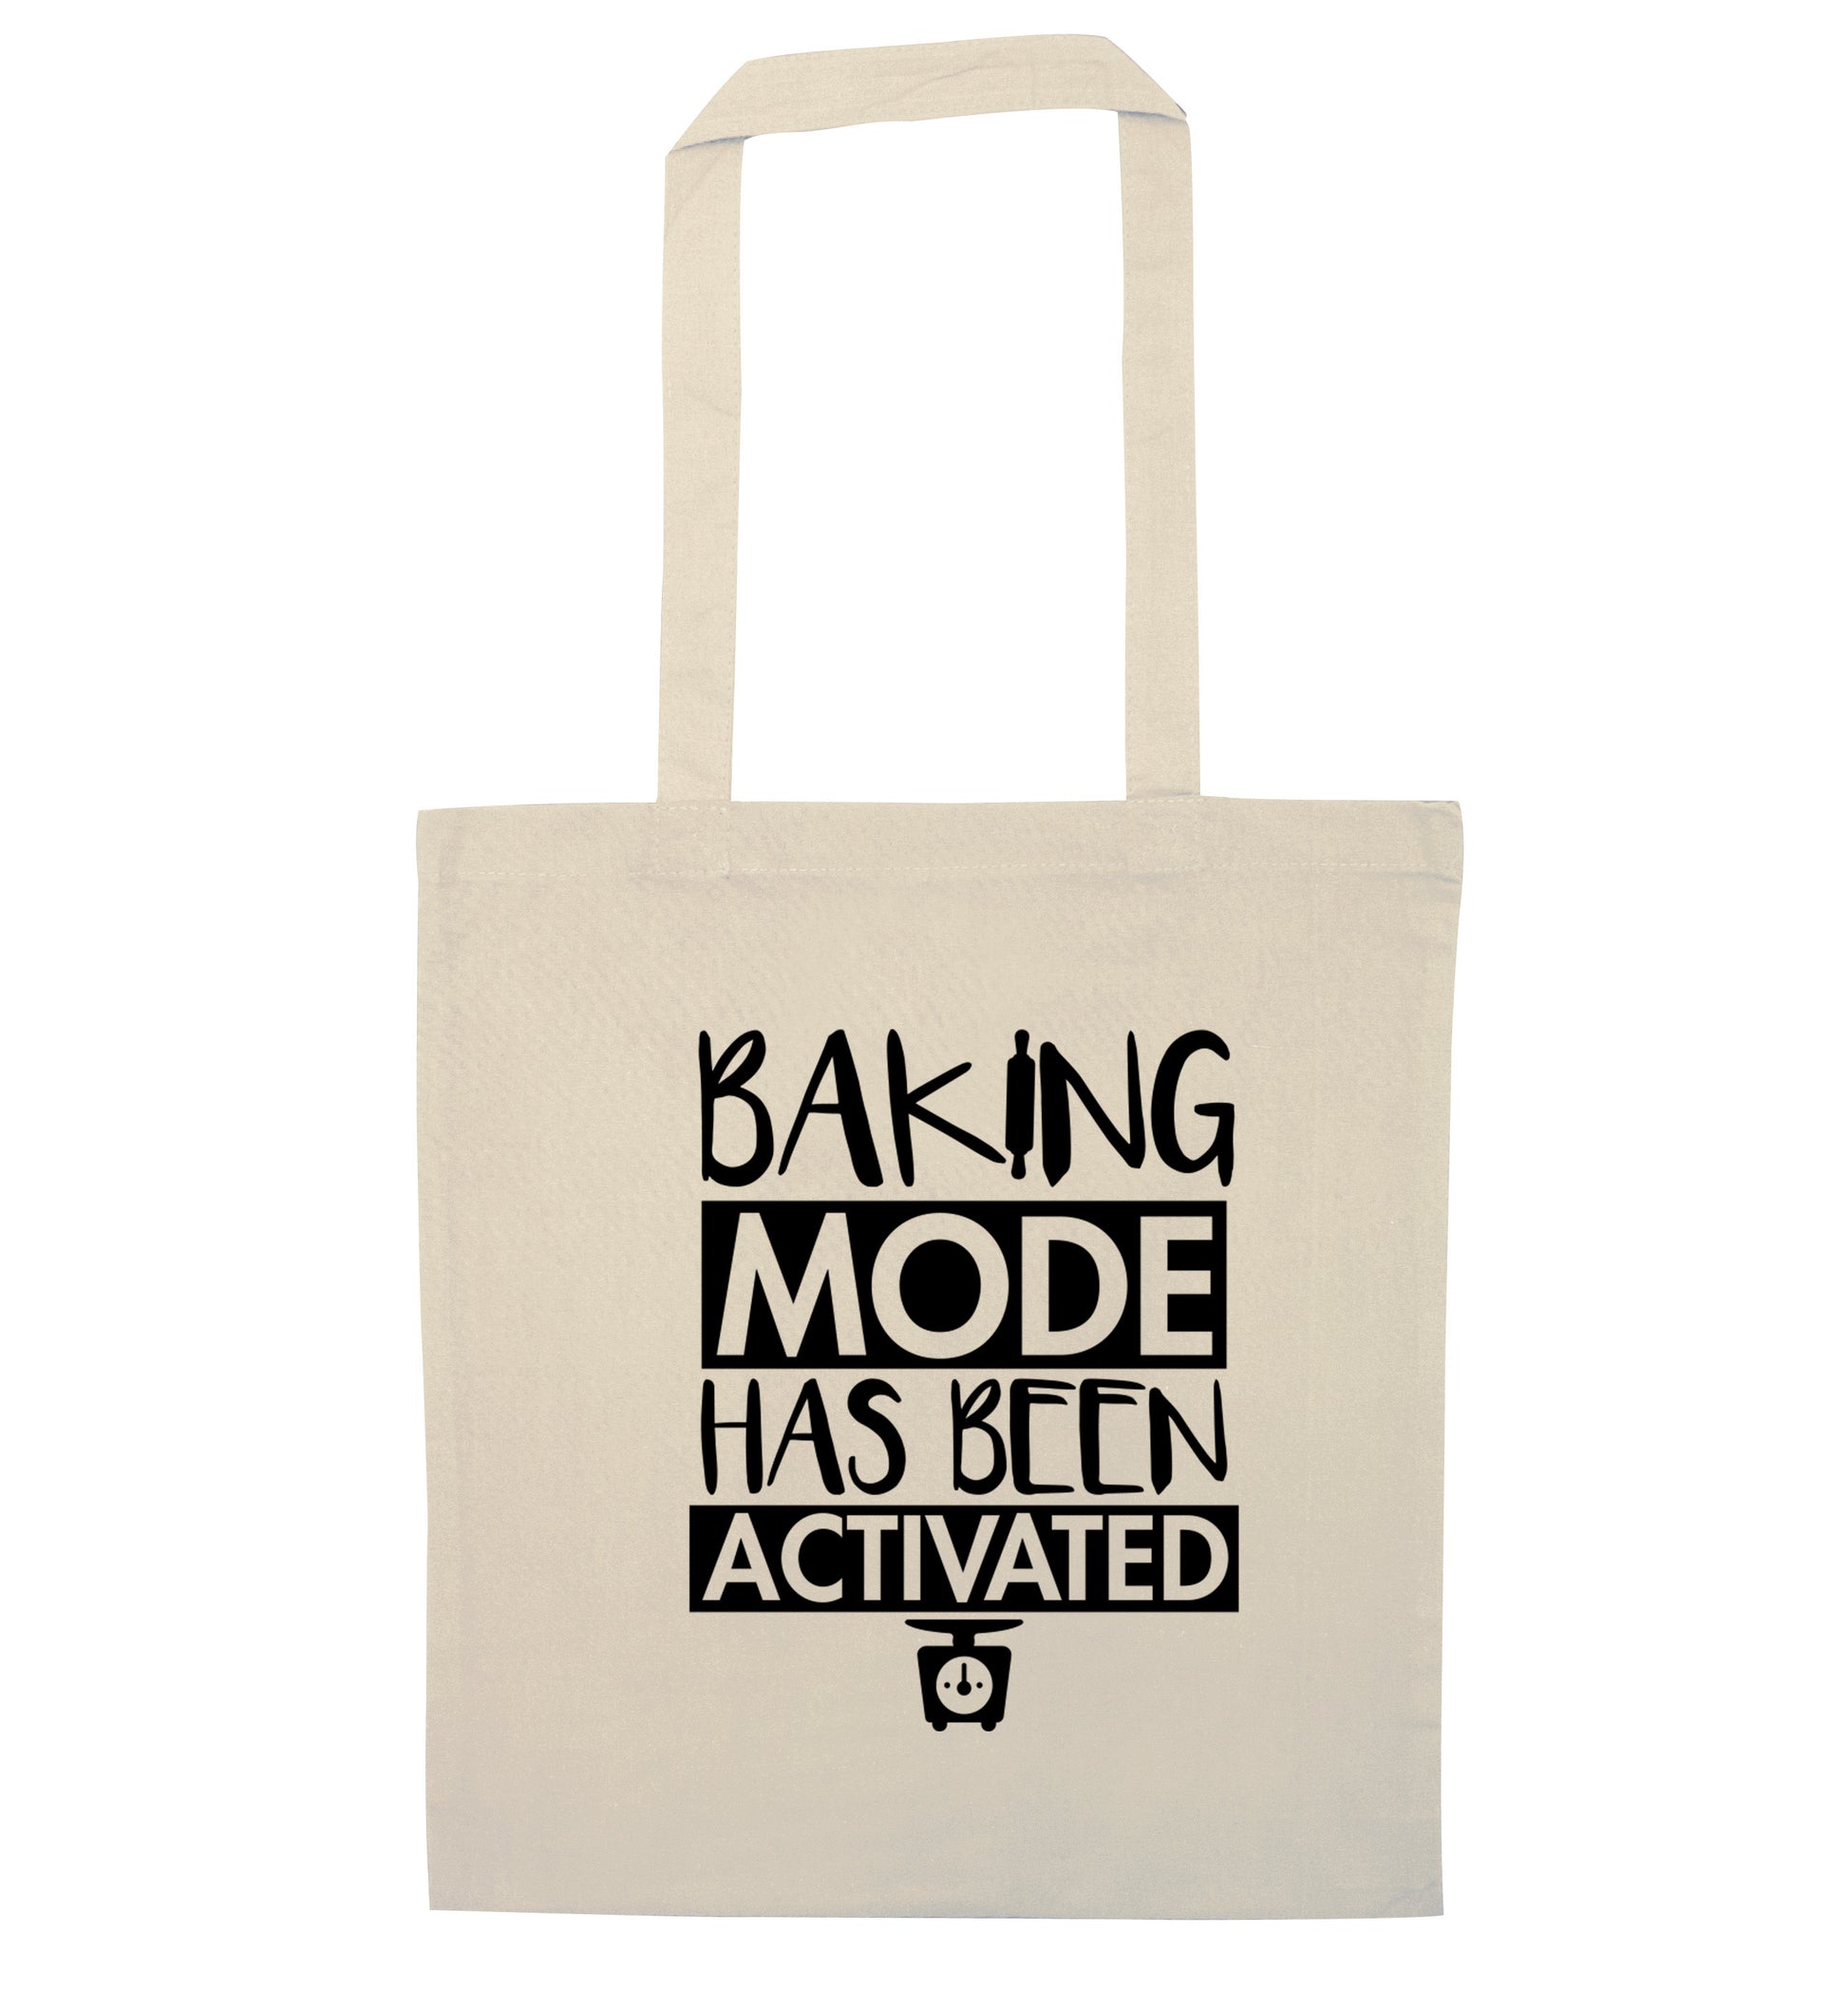 Baking mode has been activated natural tote bag